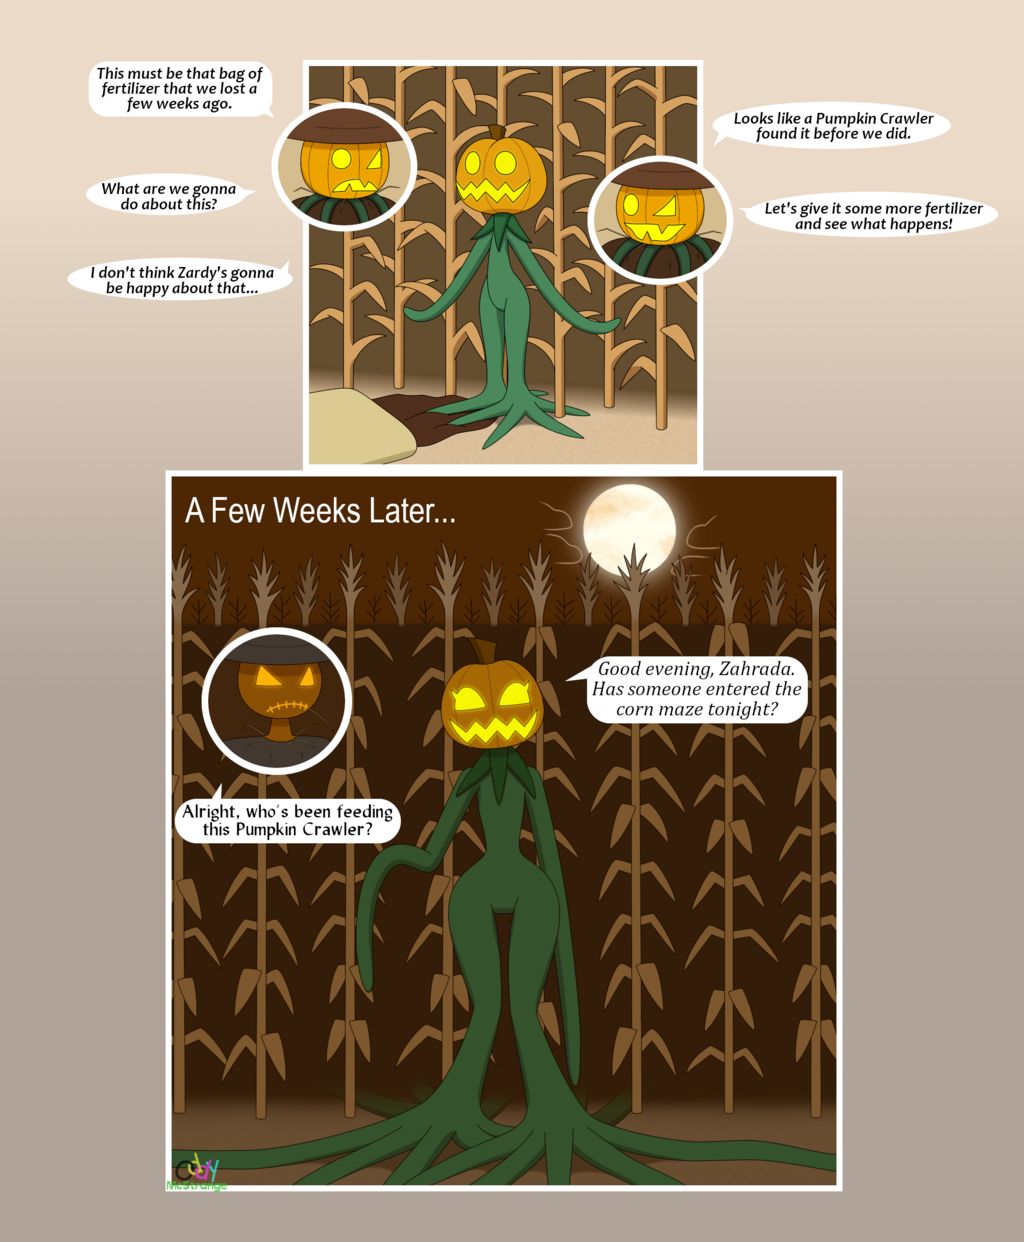 Why You Shouldn't Give Fertilizer To A Pumpkin Crawler